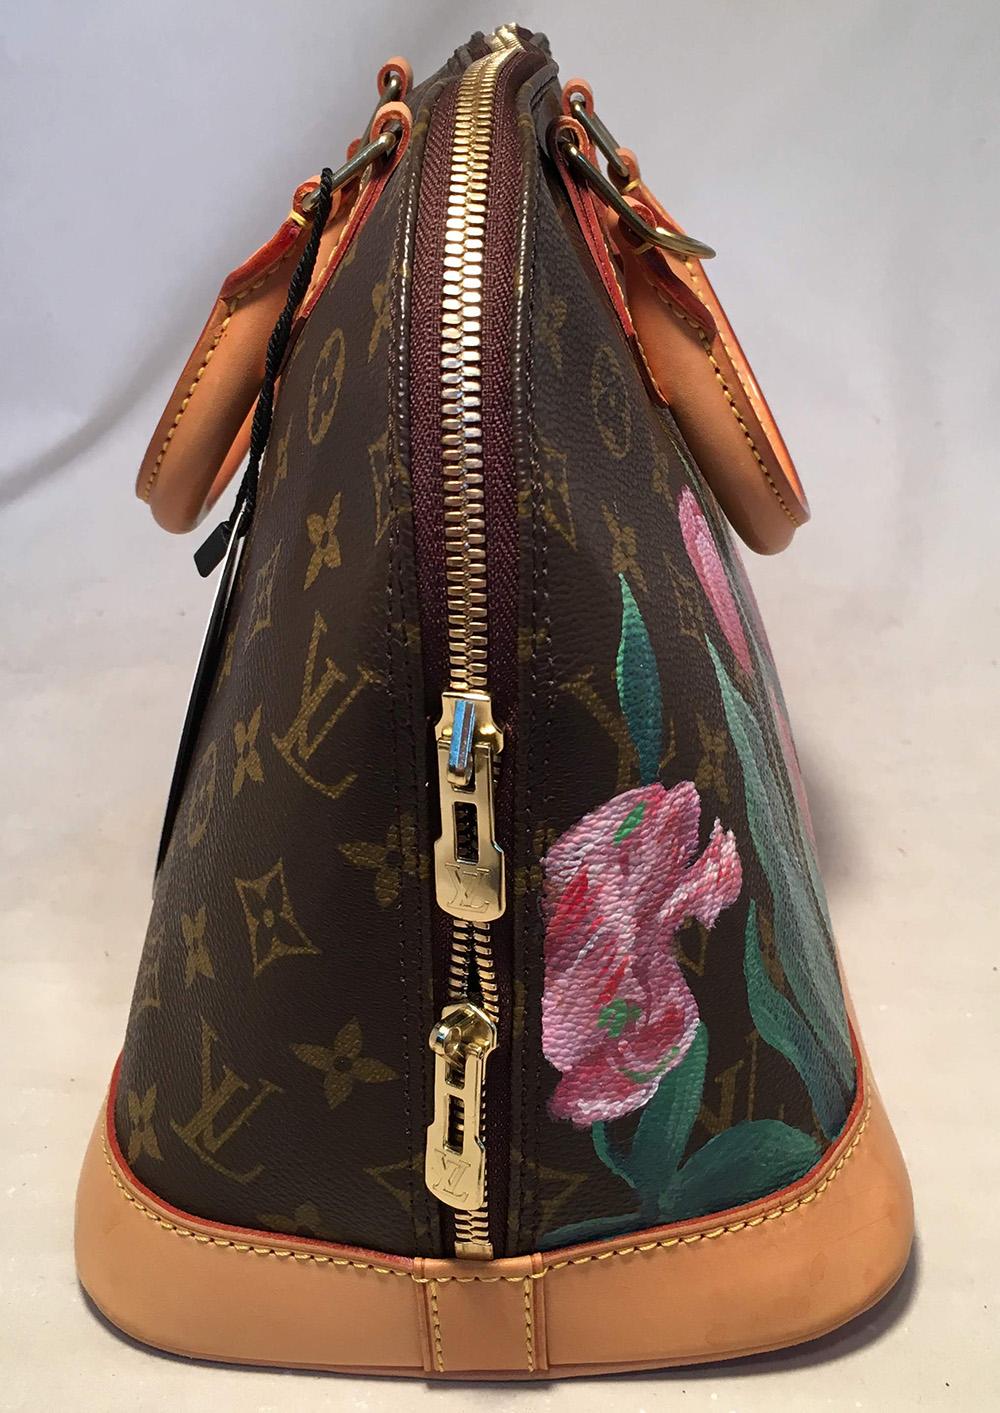 Louis Vuitton Customized Hand Painted Tulip Monogram Alma Bag in excellent condition. Signature Louis Vuitton monogram canvas exterior with tan leather bottom & handles trimmed with golden brass hardware. The monogram canvas has been customized by